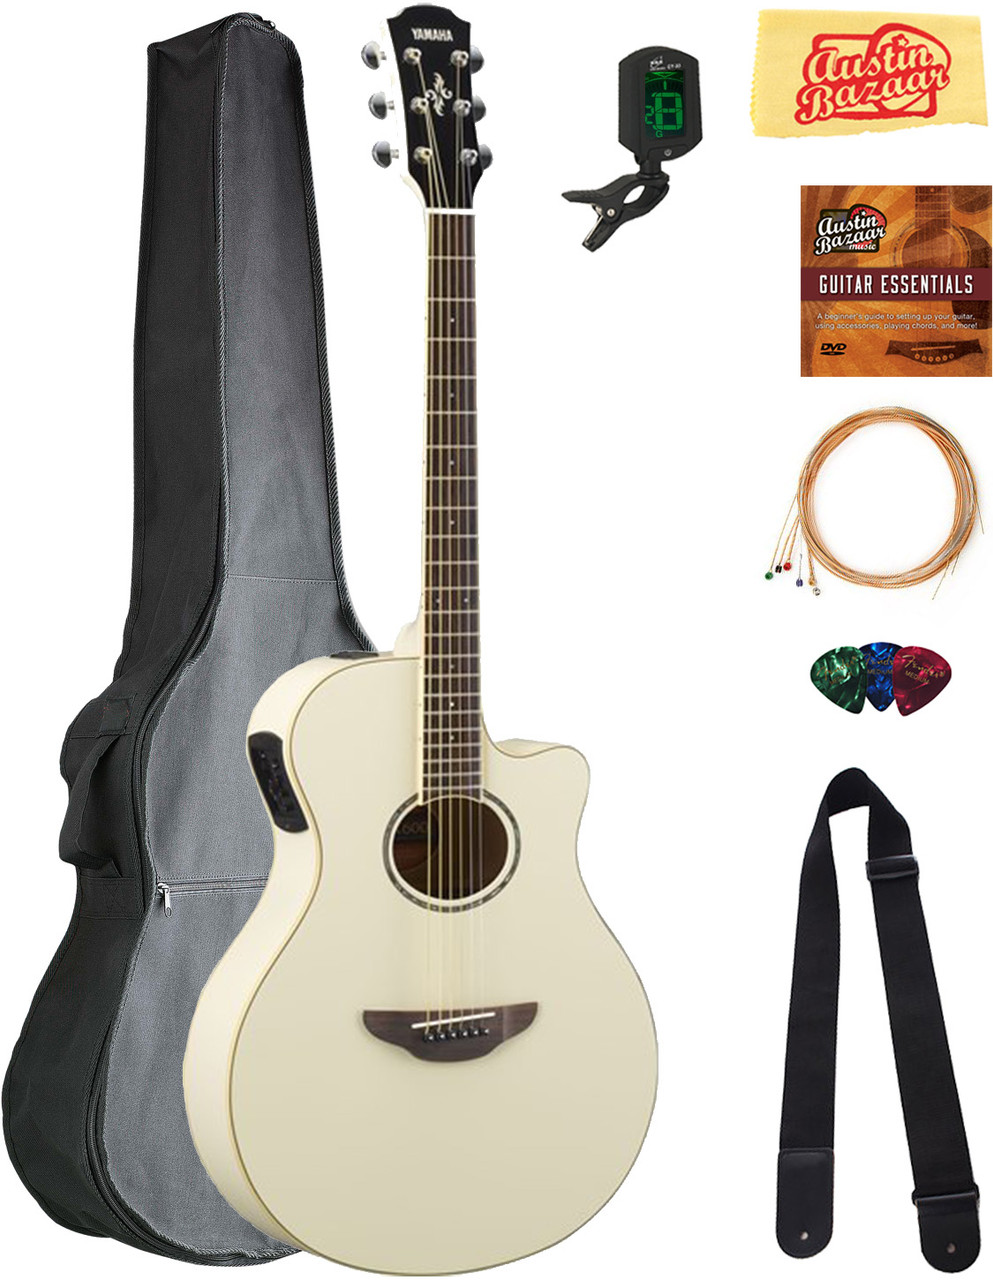 Yamaha APX600 Thin Body Acoustic-Electric Guitar - Vintage White w/ Gig Bag